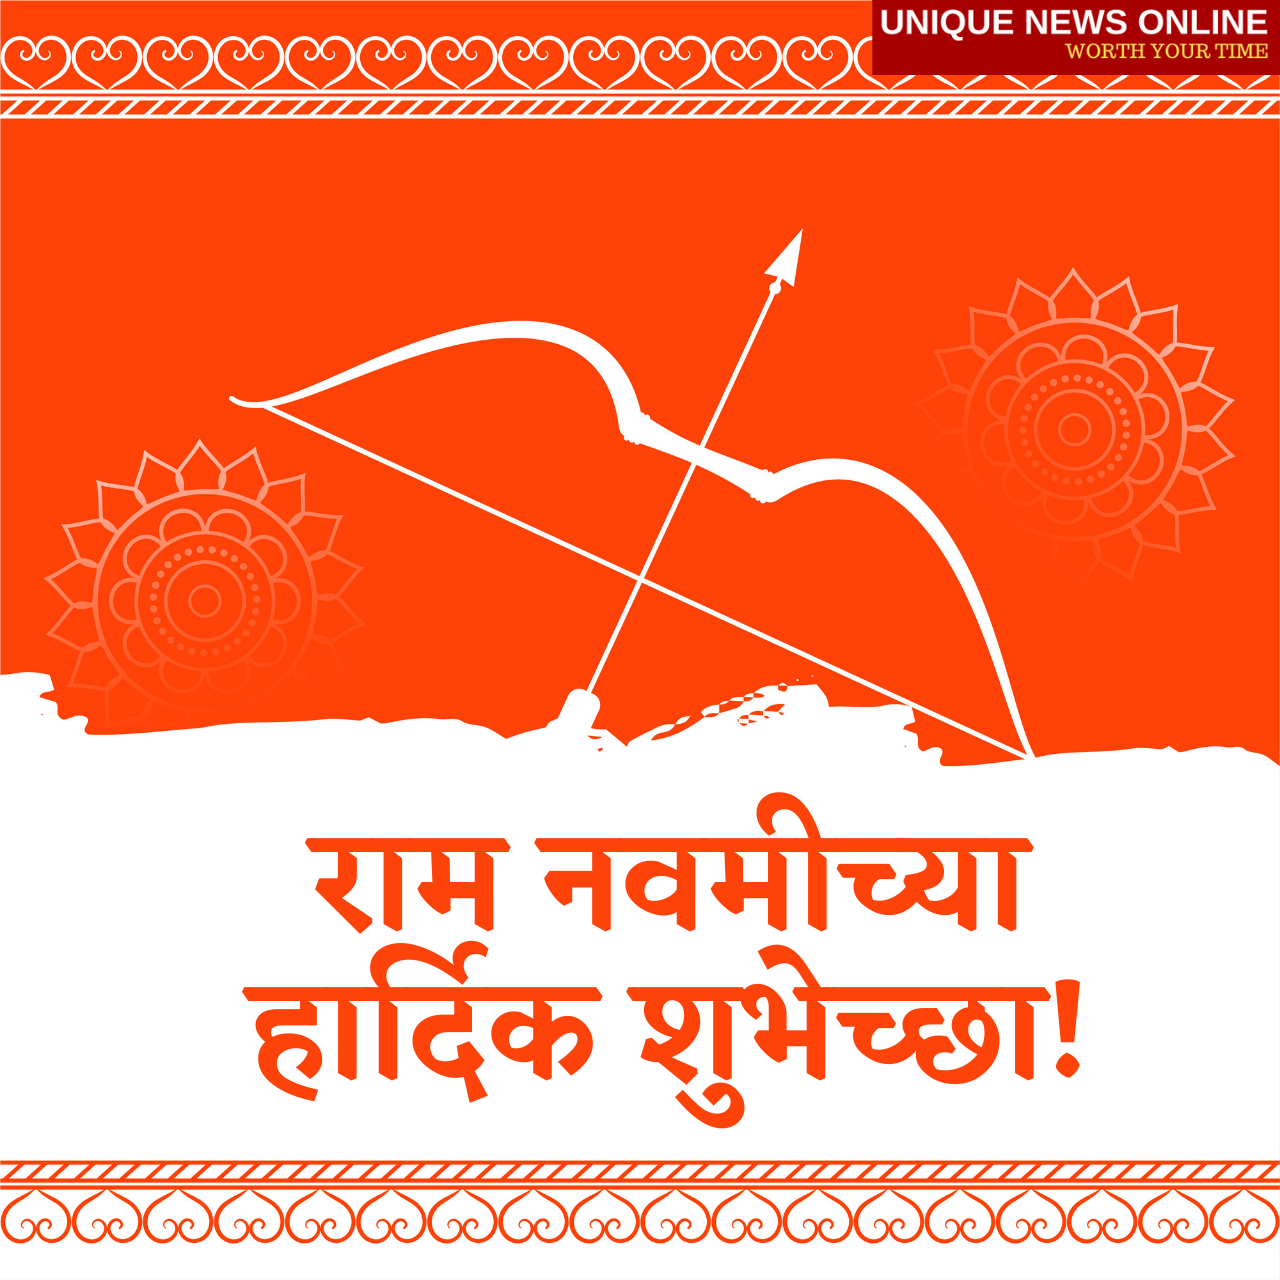 Happy Ram Navami 2021 Wishes in Marathi, Messages, Quotes, Images, and Greetings to Share